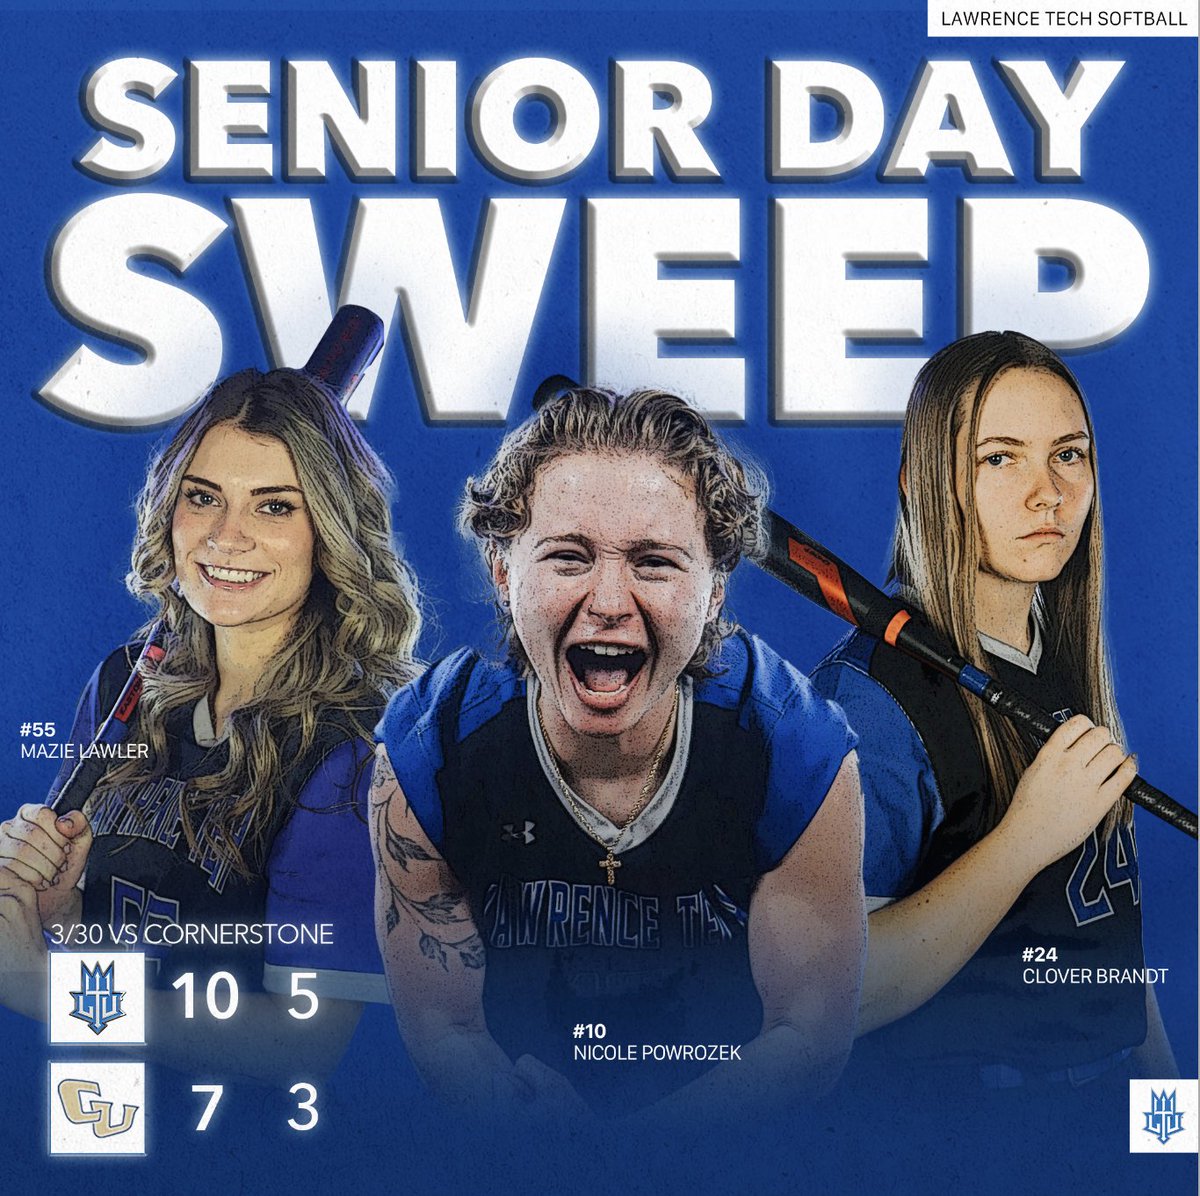 Congratulations to LTU Softball for sweeping Cornerstone University this weekend! The Blue Devils are back in action on Wednesday as they take on Aquinas College! #WeAreLTU